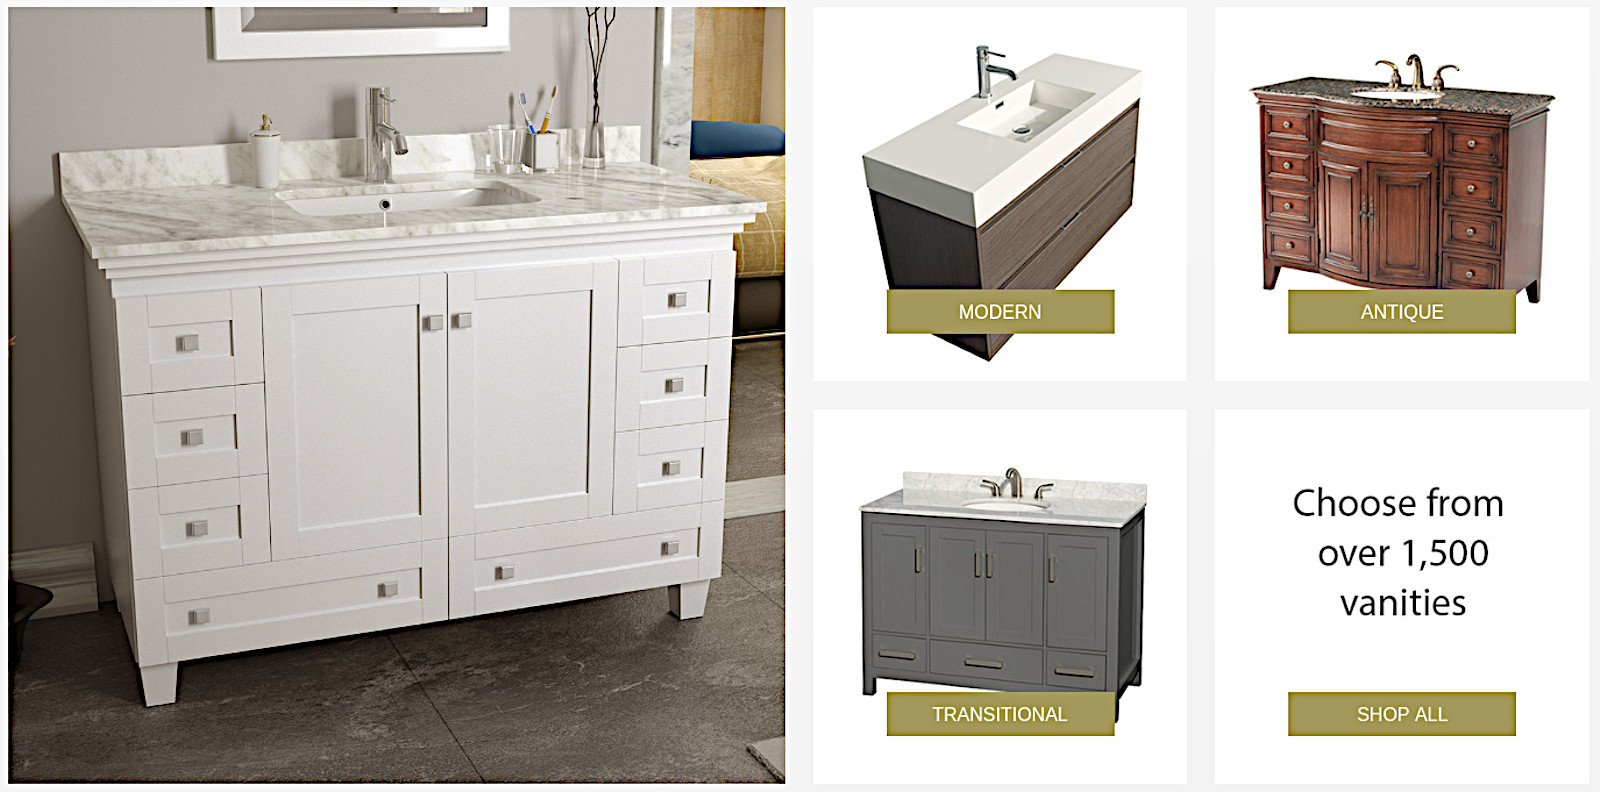 Affordable Price modern antique transitional vanities